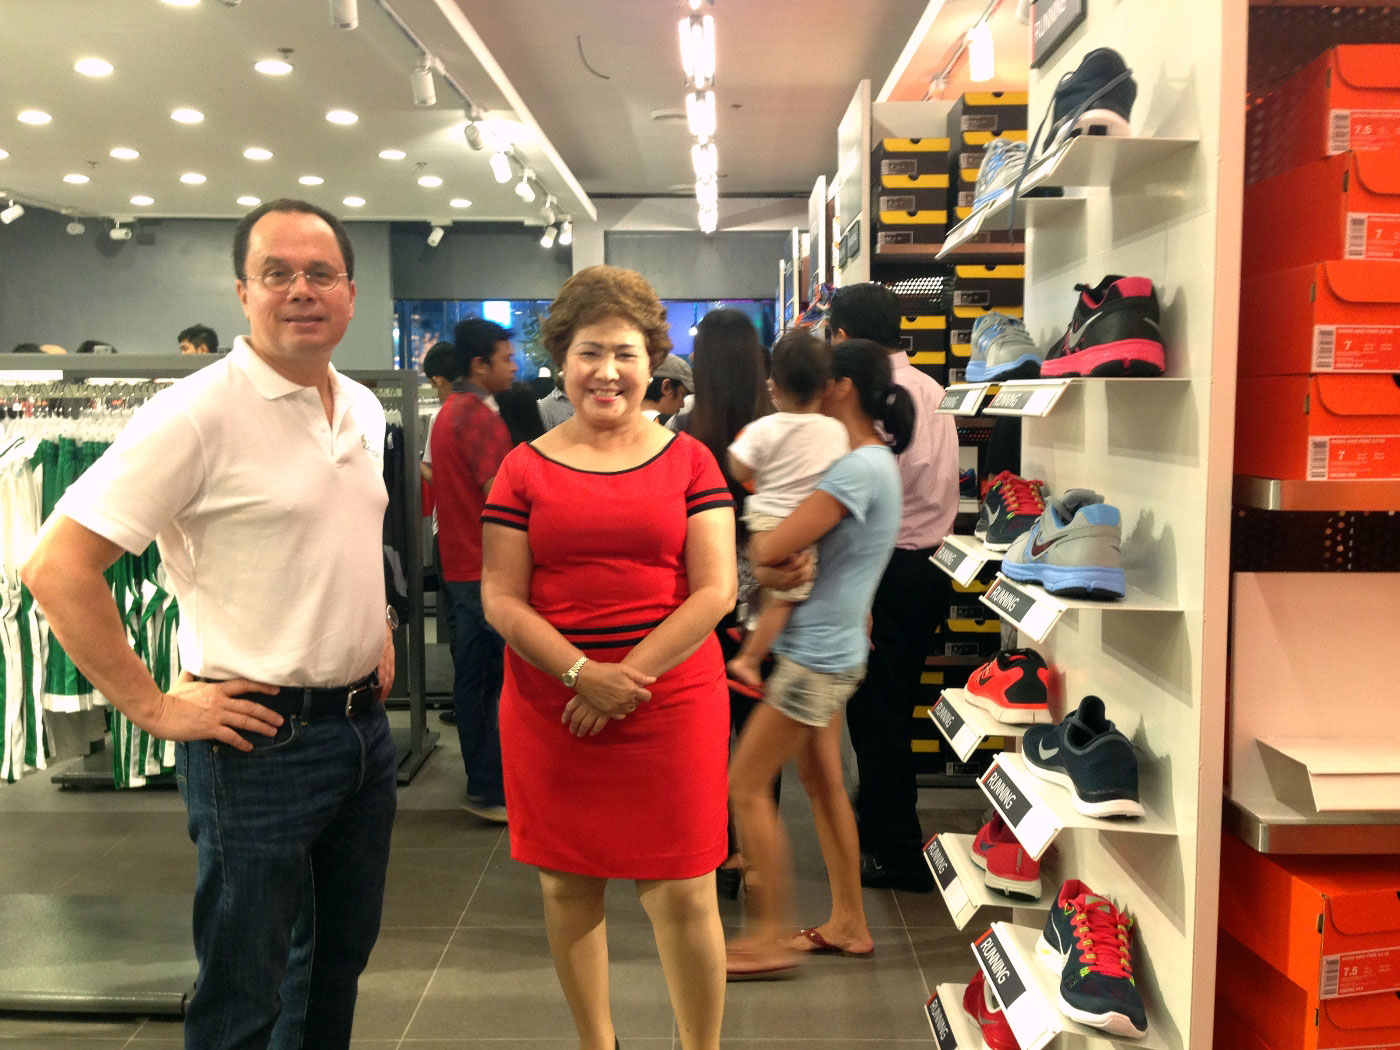 TOURISM DRAW. Lapu-Lapu City Mayor Paz C. Radaza with AboitizLand president and CEO Andoni Aboitiz inside the Nike Factory Store in The Outlets at Pueblo Verde. Radaza said The Outlets will complement the city's tourism push. (Photo by Max Limpag)